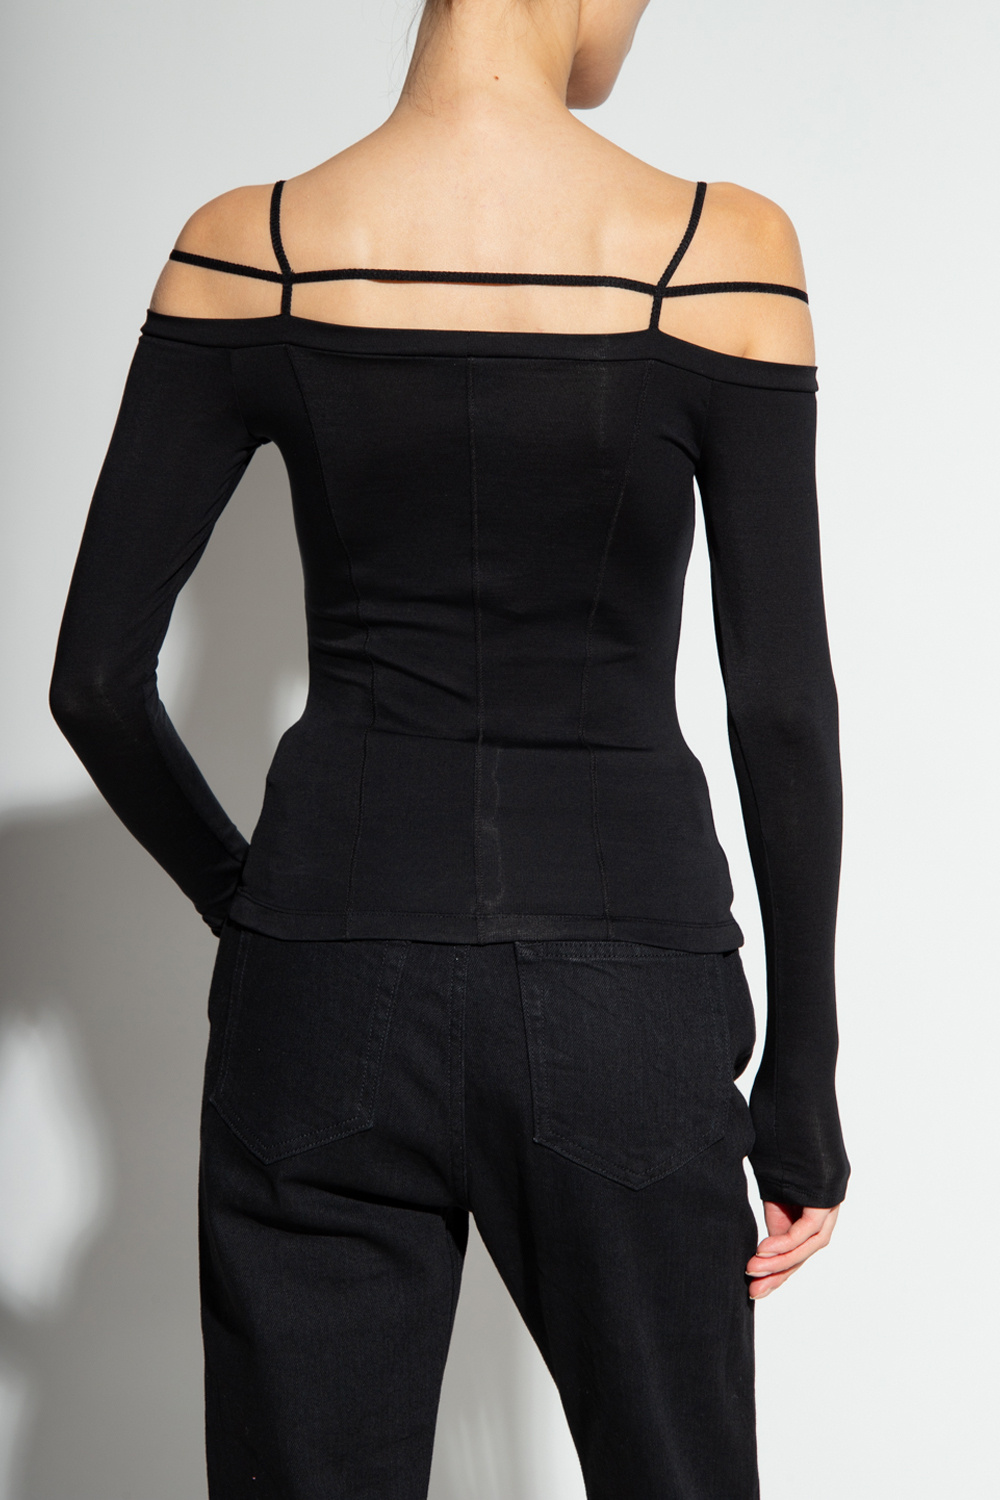 the - Jacquemus 'Sierra' off | shoulder top - Women's Clothing Gag